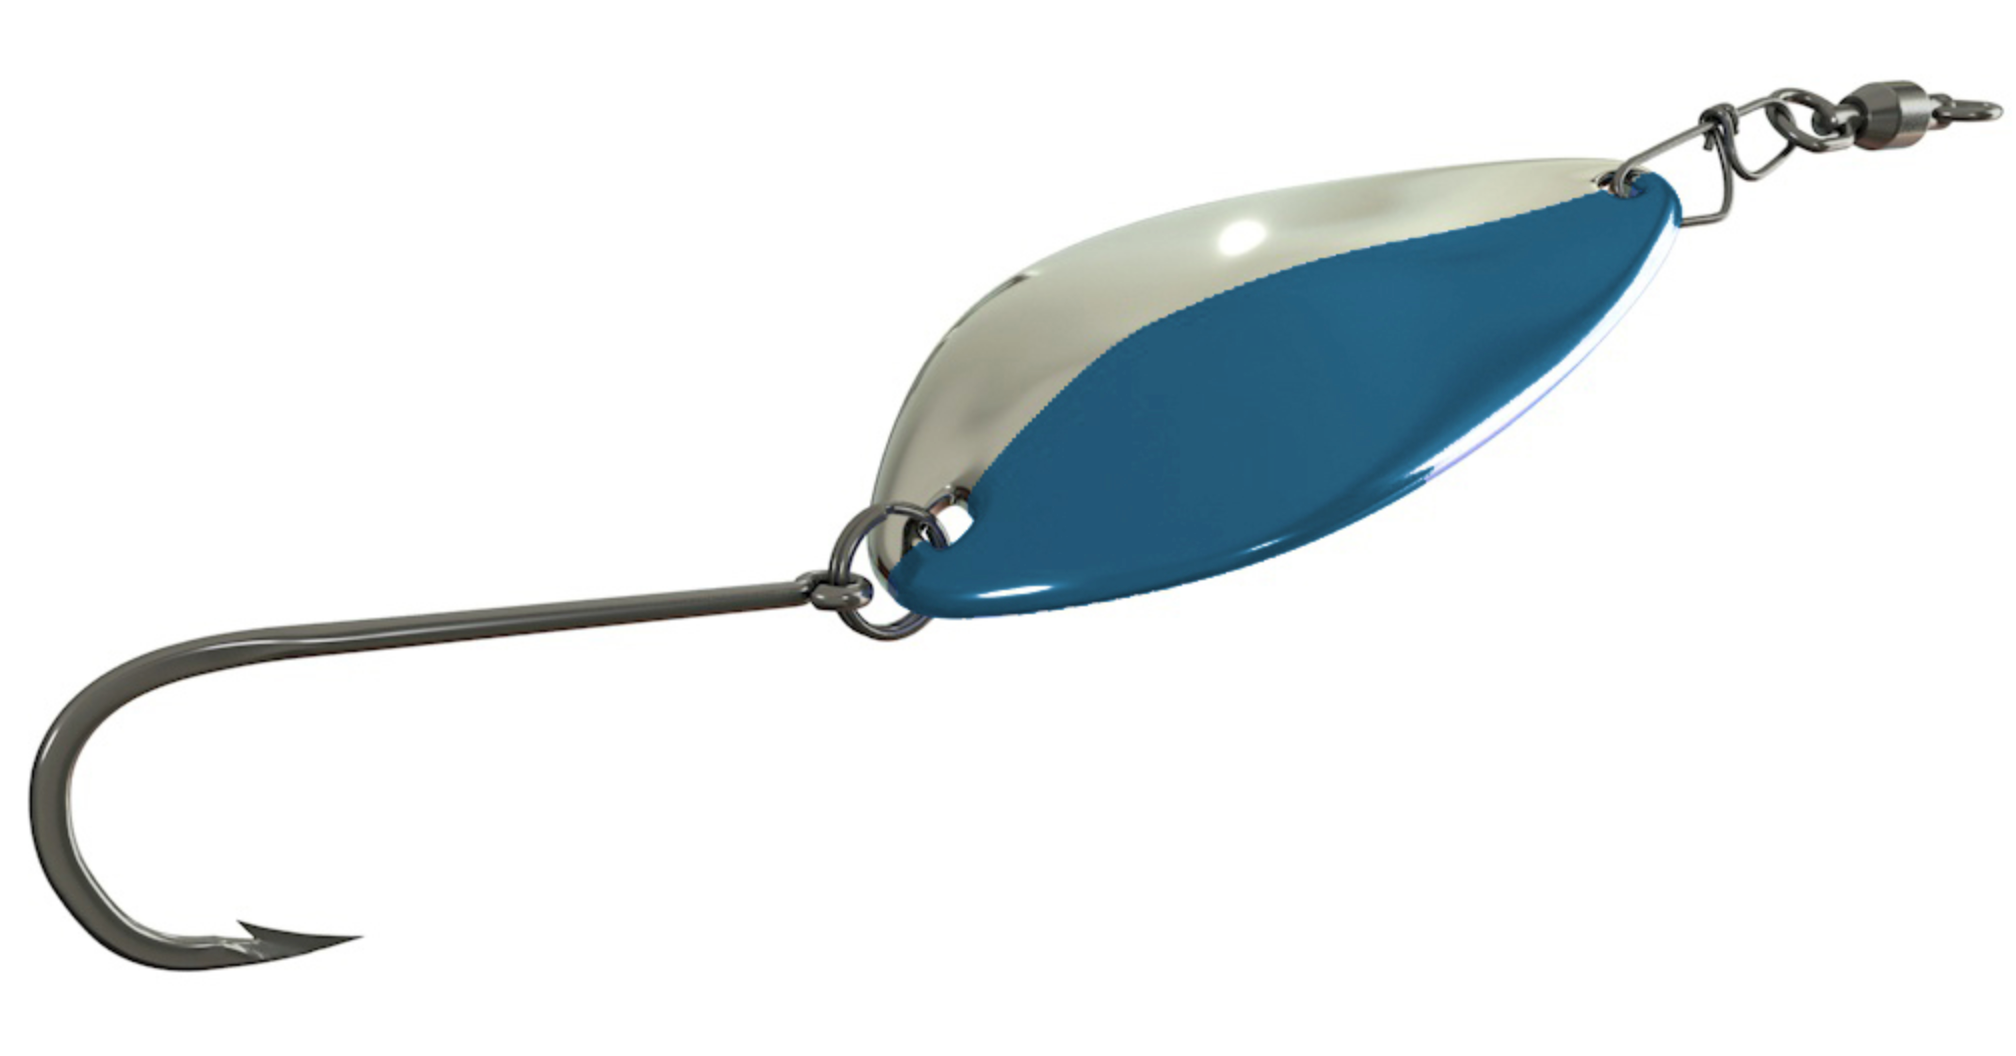 acme Little Cleo Spoon Fishing Lure, Nickel Color, 3/4 oz Size